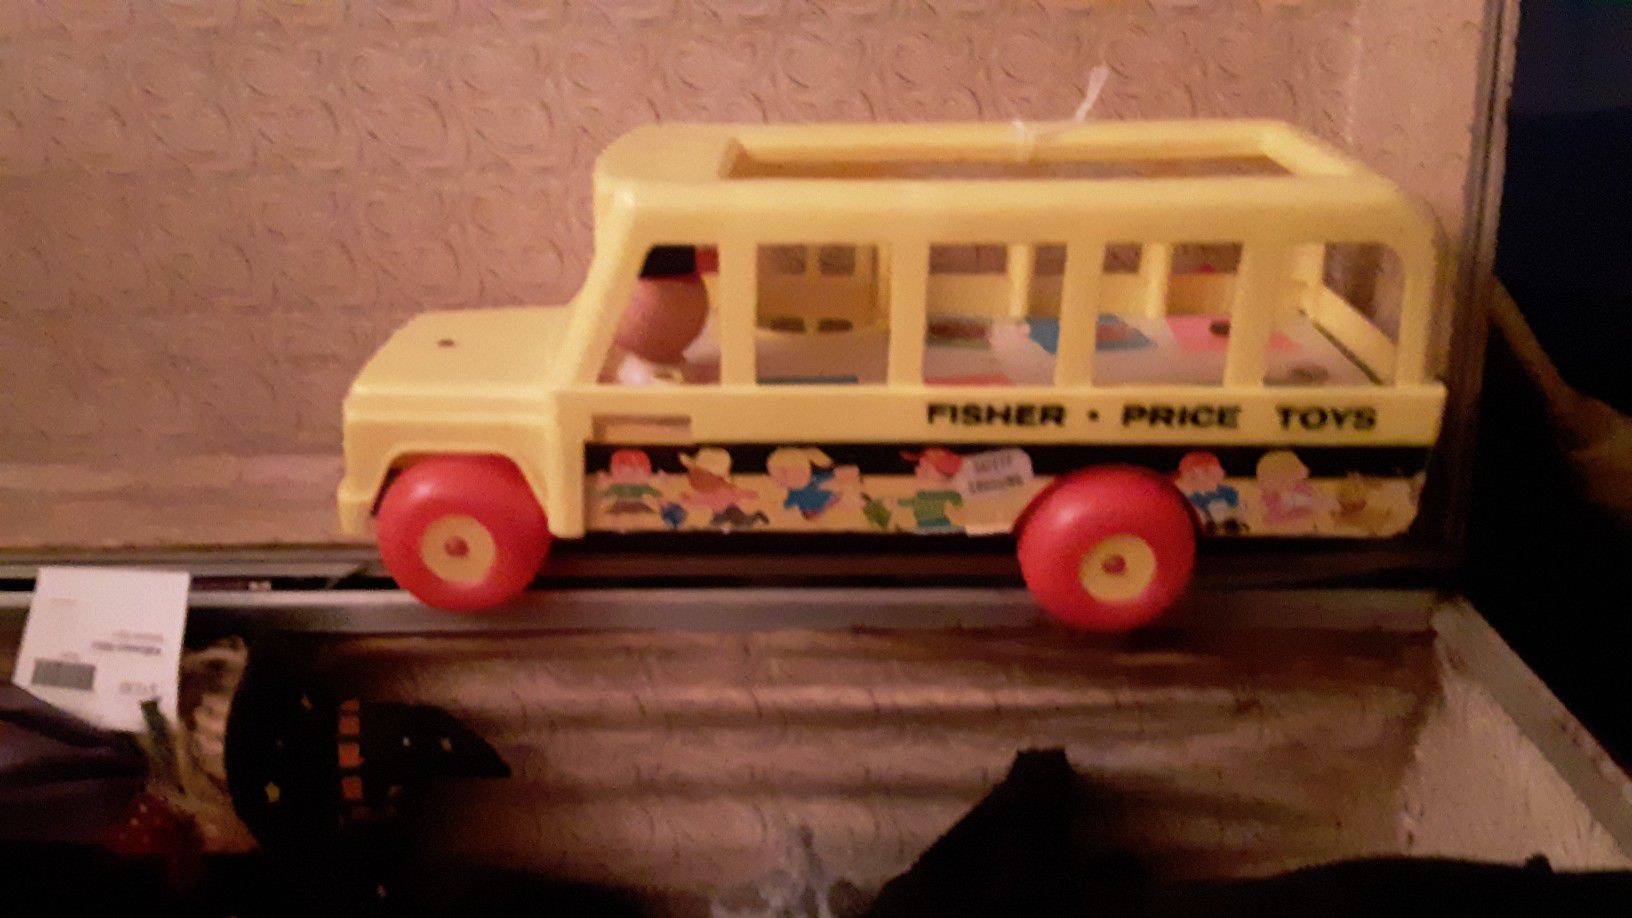 Collectible Fisher Price toys